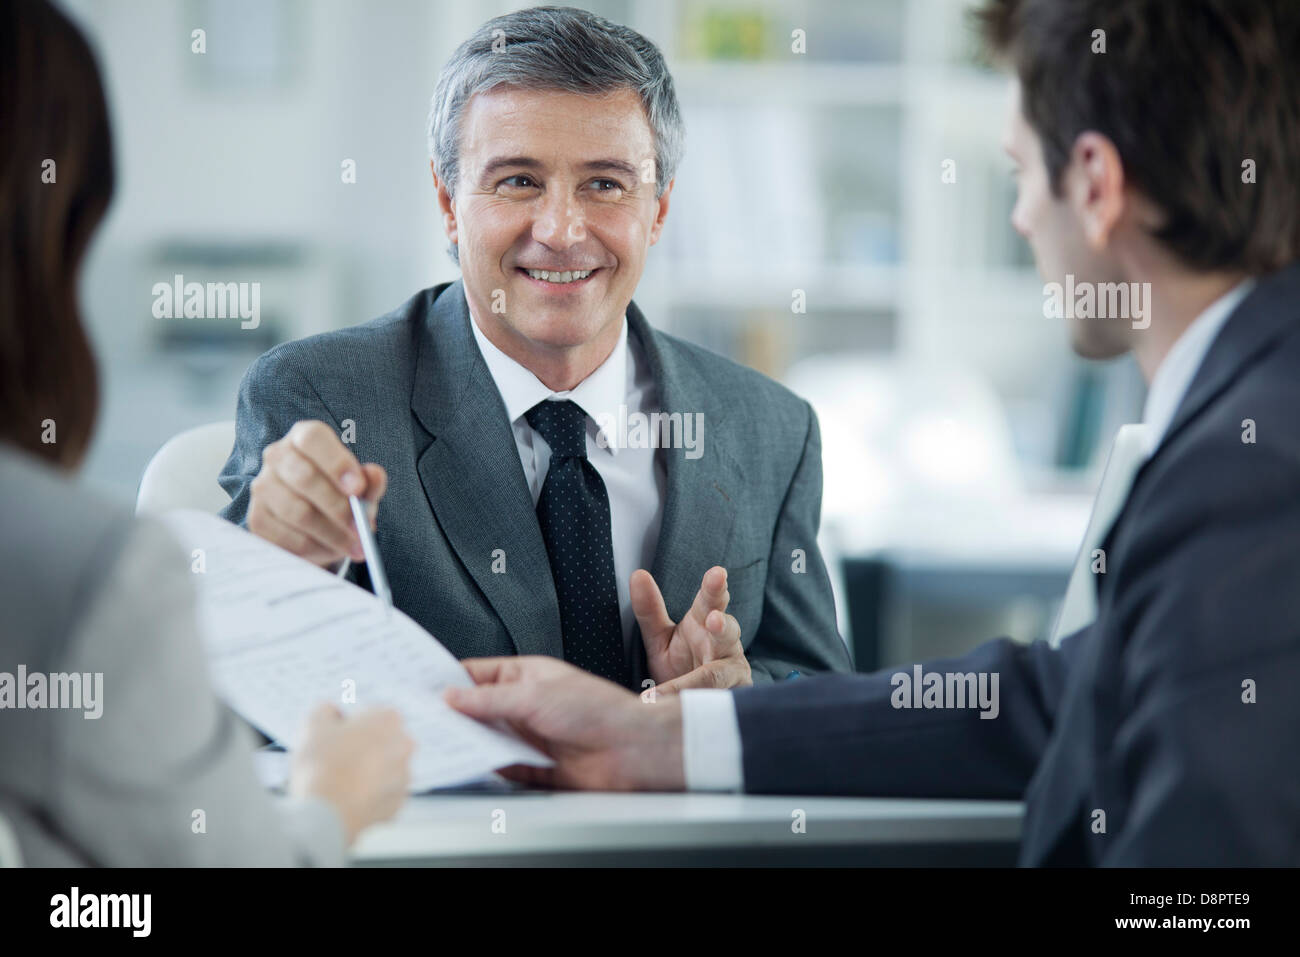 Businessman meeting with clients Stock Photo